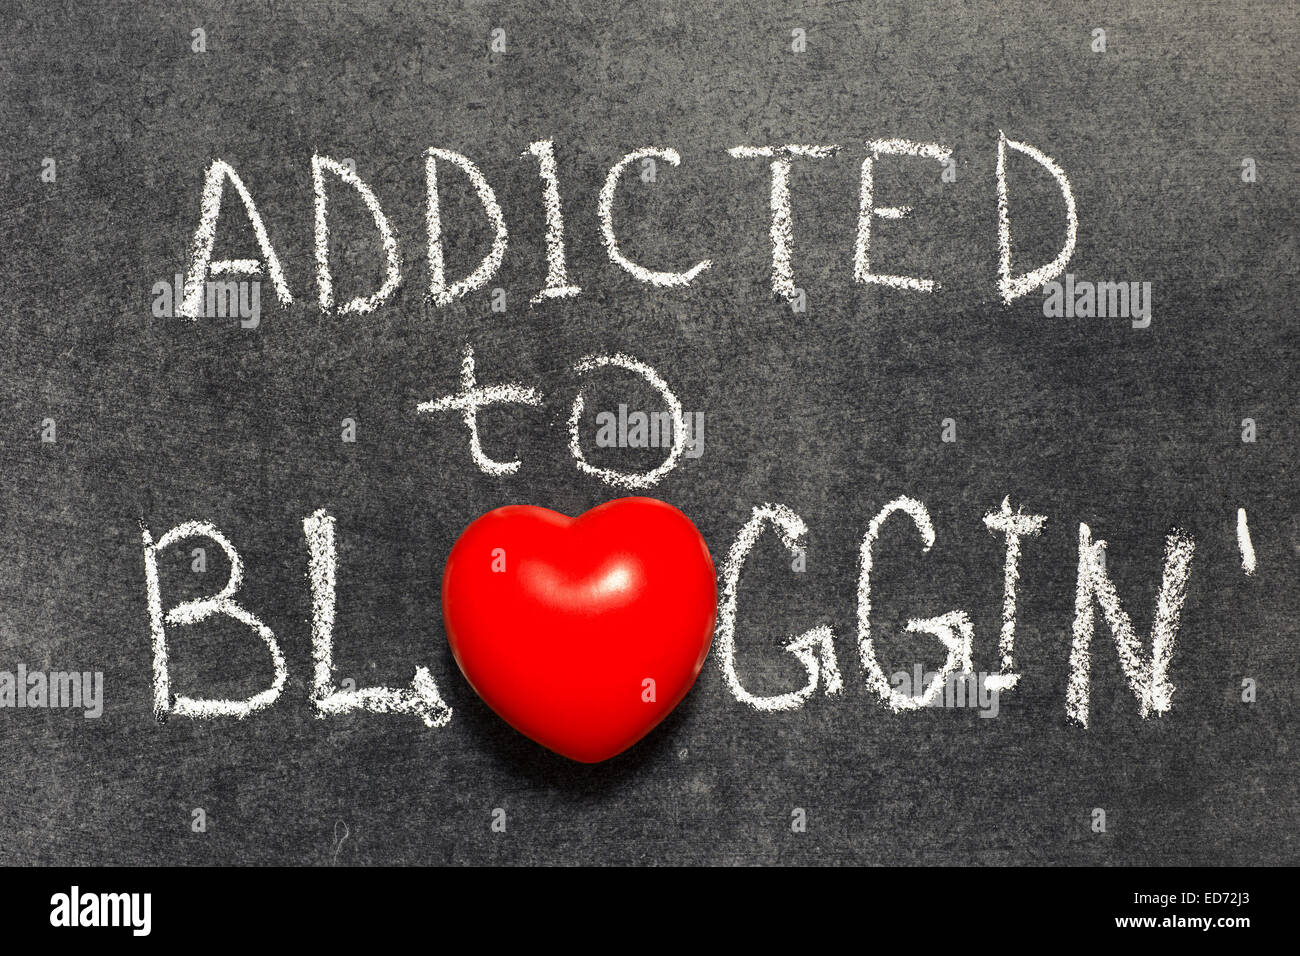 addicted to blogging phrase handwritten on blackboard with heart symbol instead of O Stock Photo